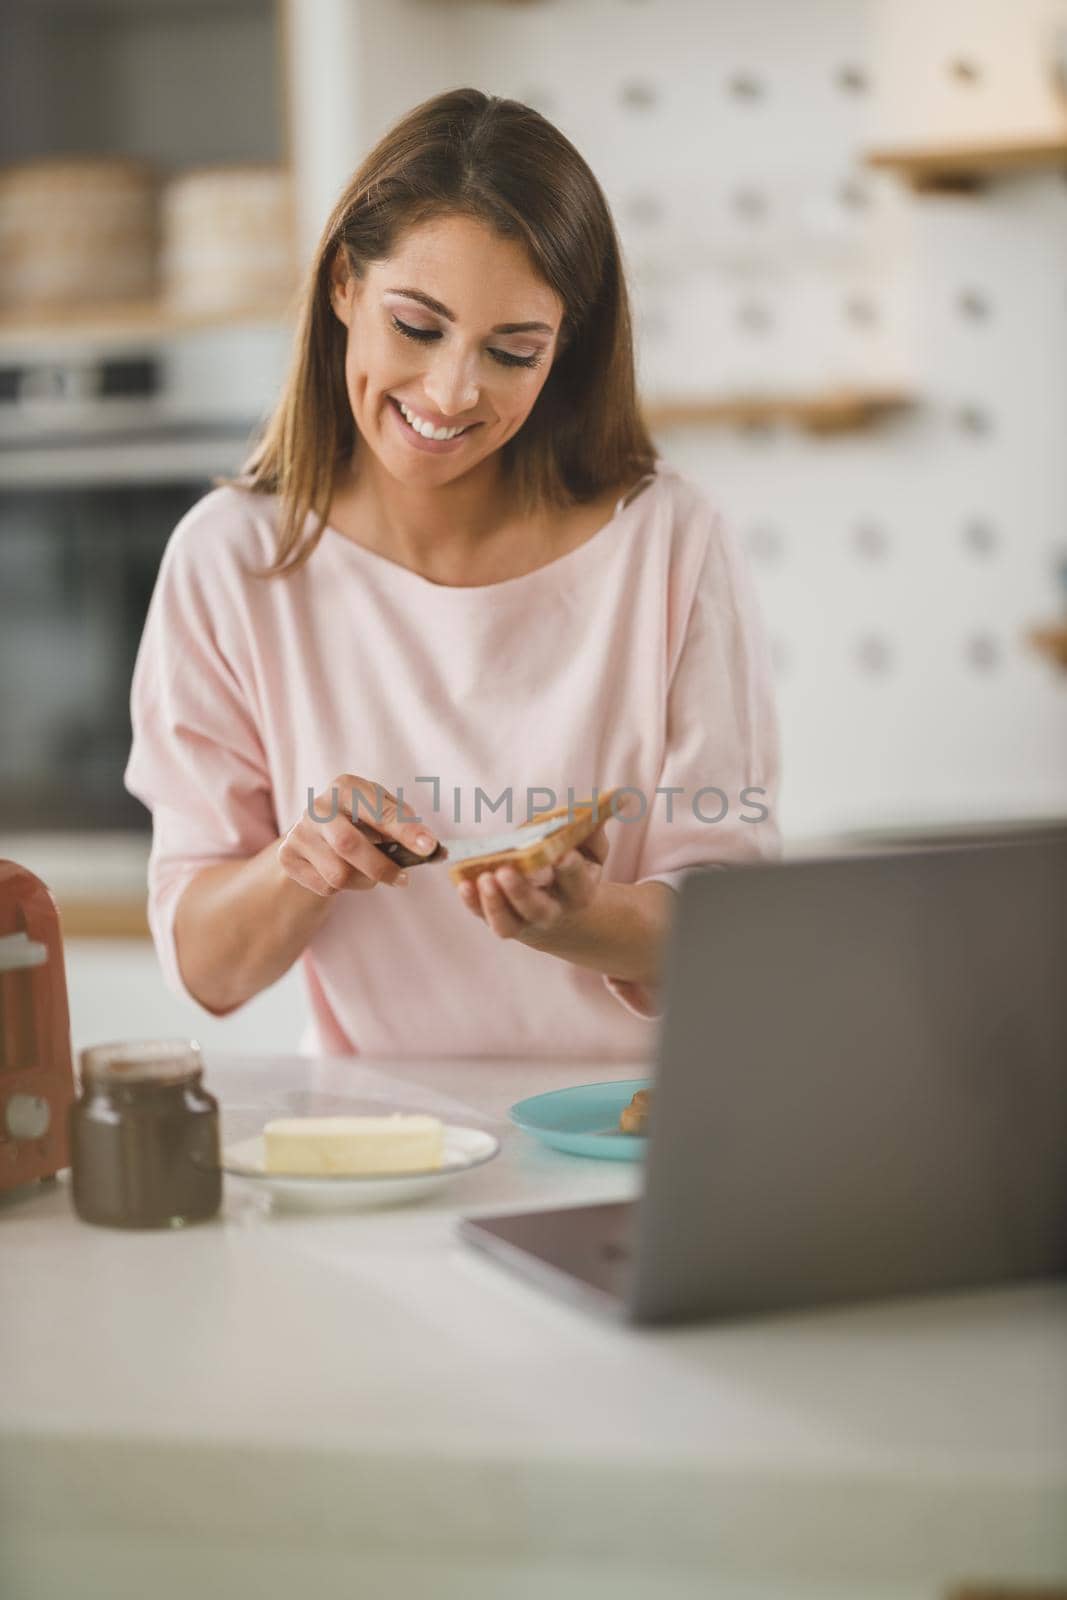 Shot of a young woman spreading butter onto toast in her kitchen.